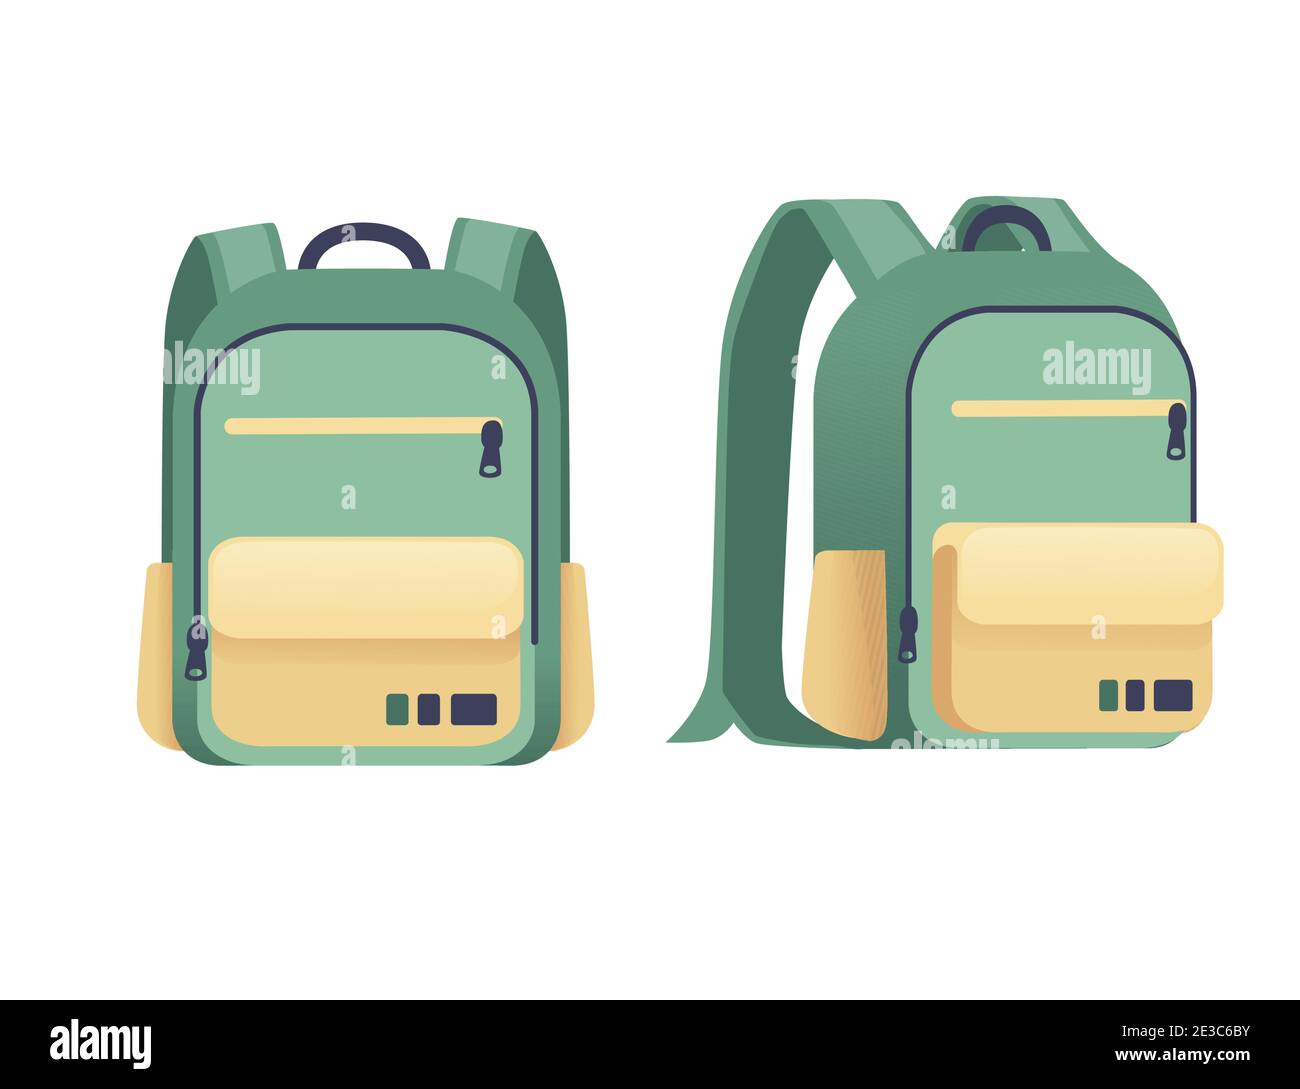 Green backpack for daily usage casual design flat vector illustration on white background Stock Vector